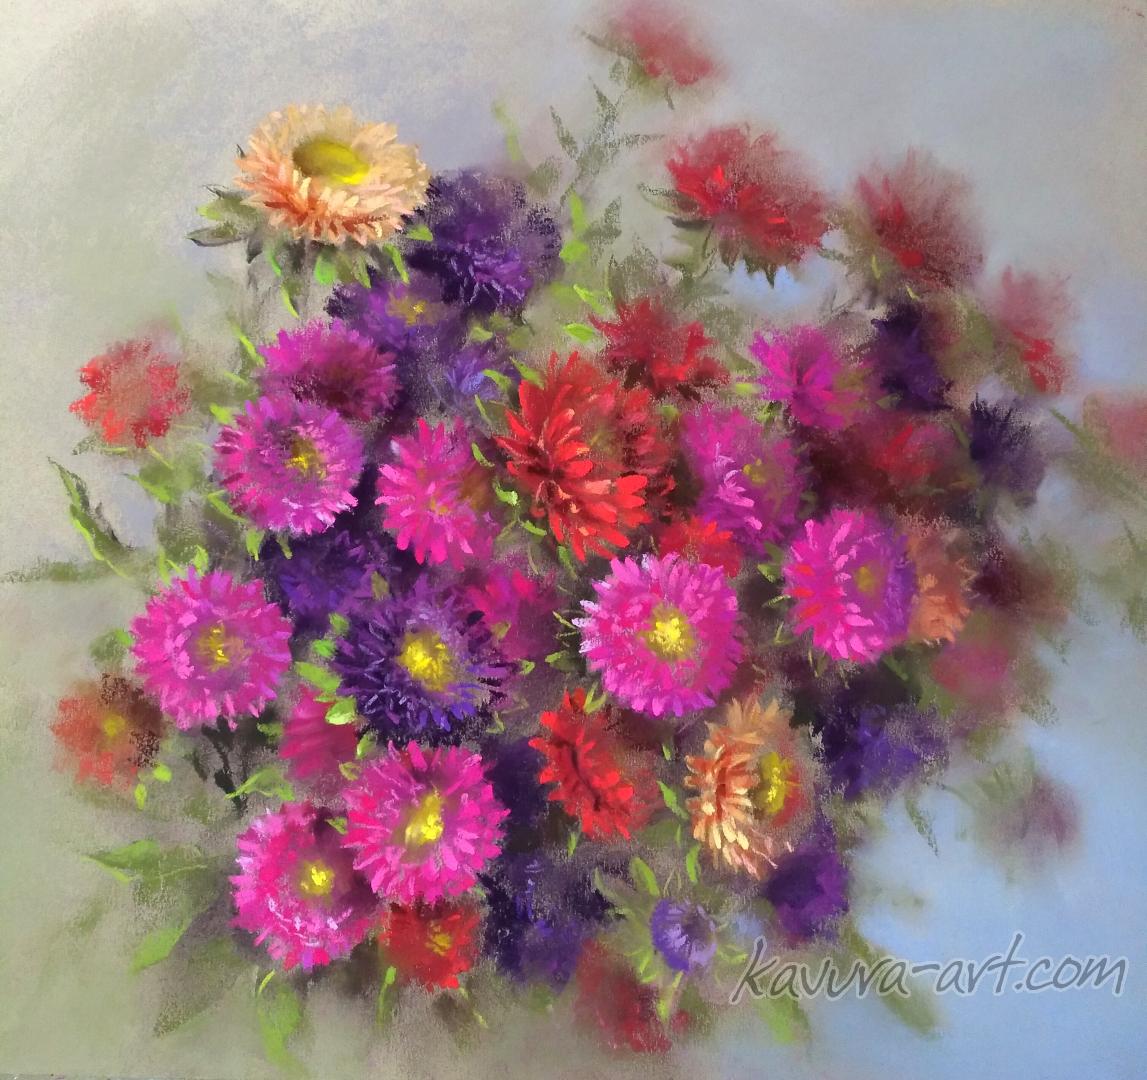 "Asters by September 1" Pastel on paper.